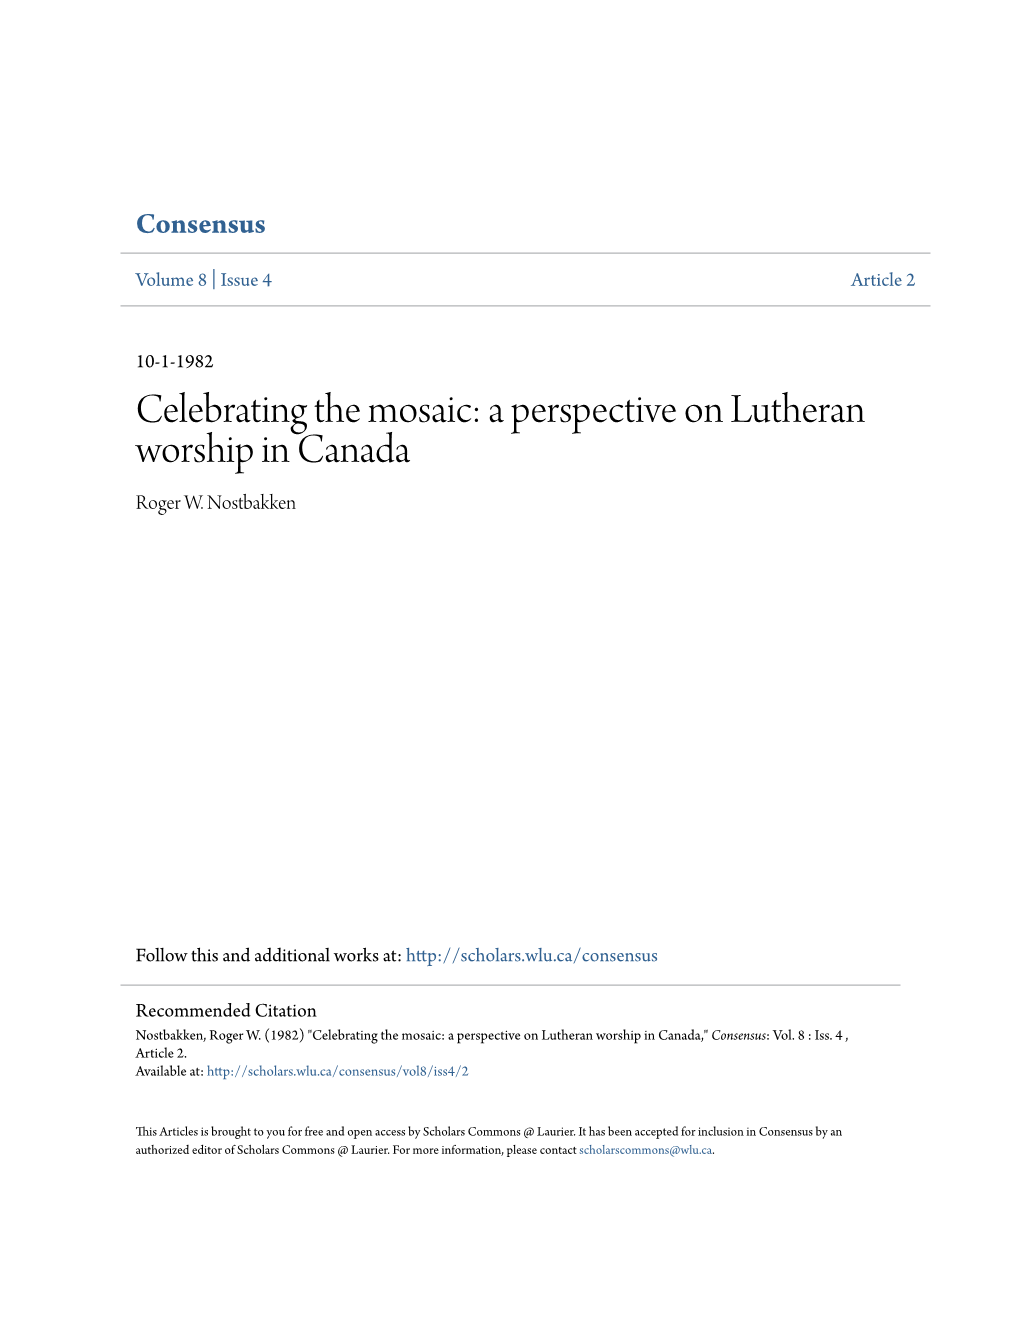 A Perspective on Lutheran Worship in Canada Roger W